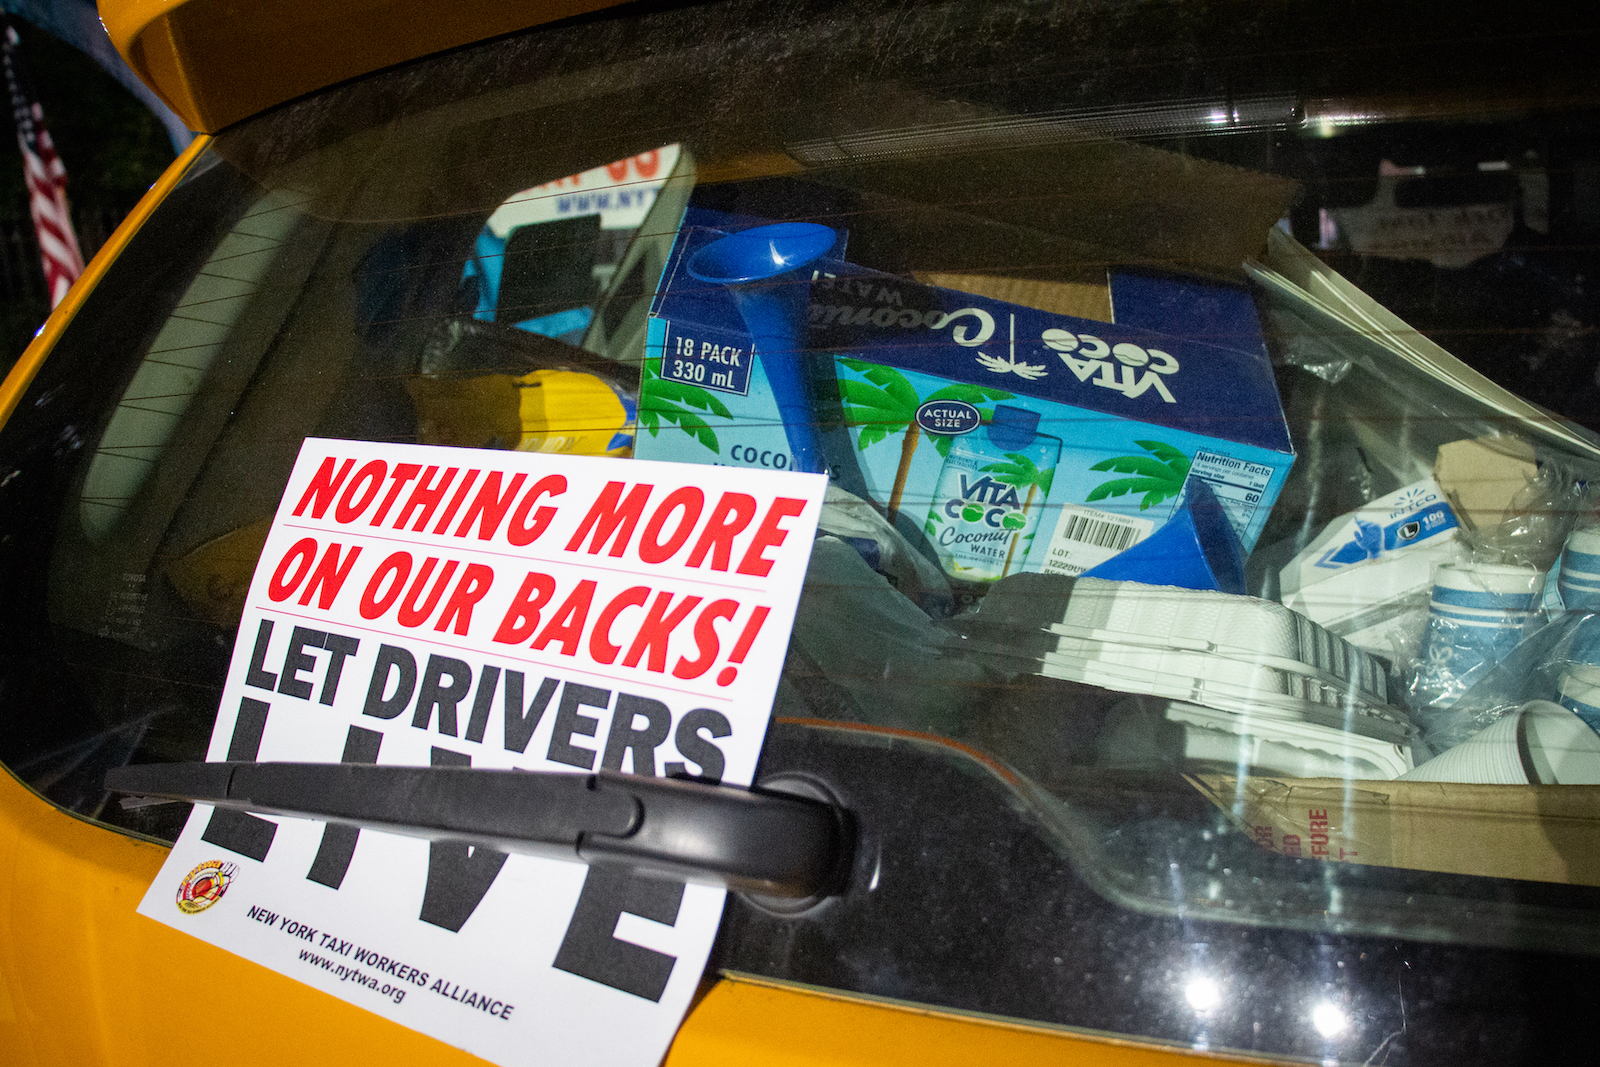 The back of a yellow cab is packed with coconut water, plastic noisemakers, paper cups and other protest supplies. A sign reading "Nothing more on our backs! Let drivers live," is stuck between the back windshield wiper and the glass.